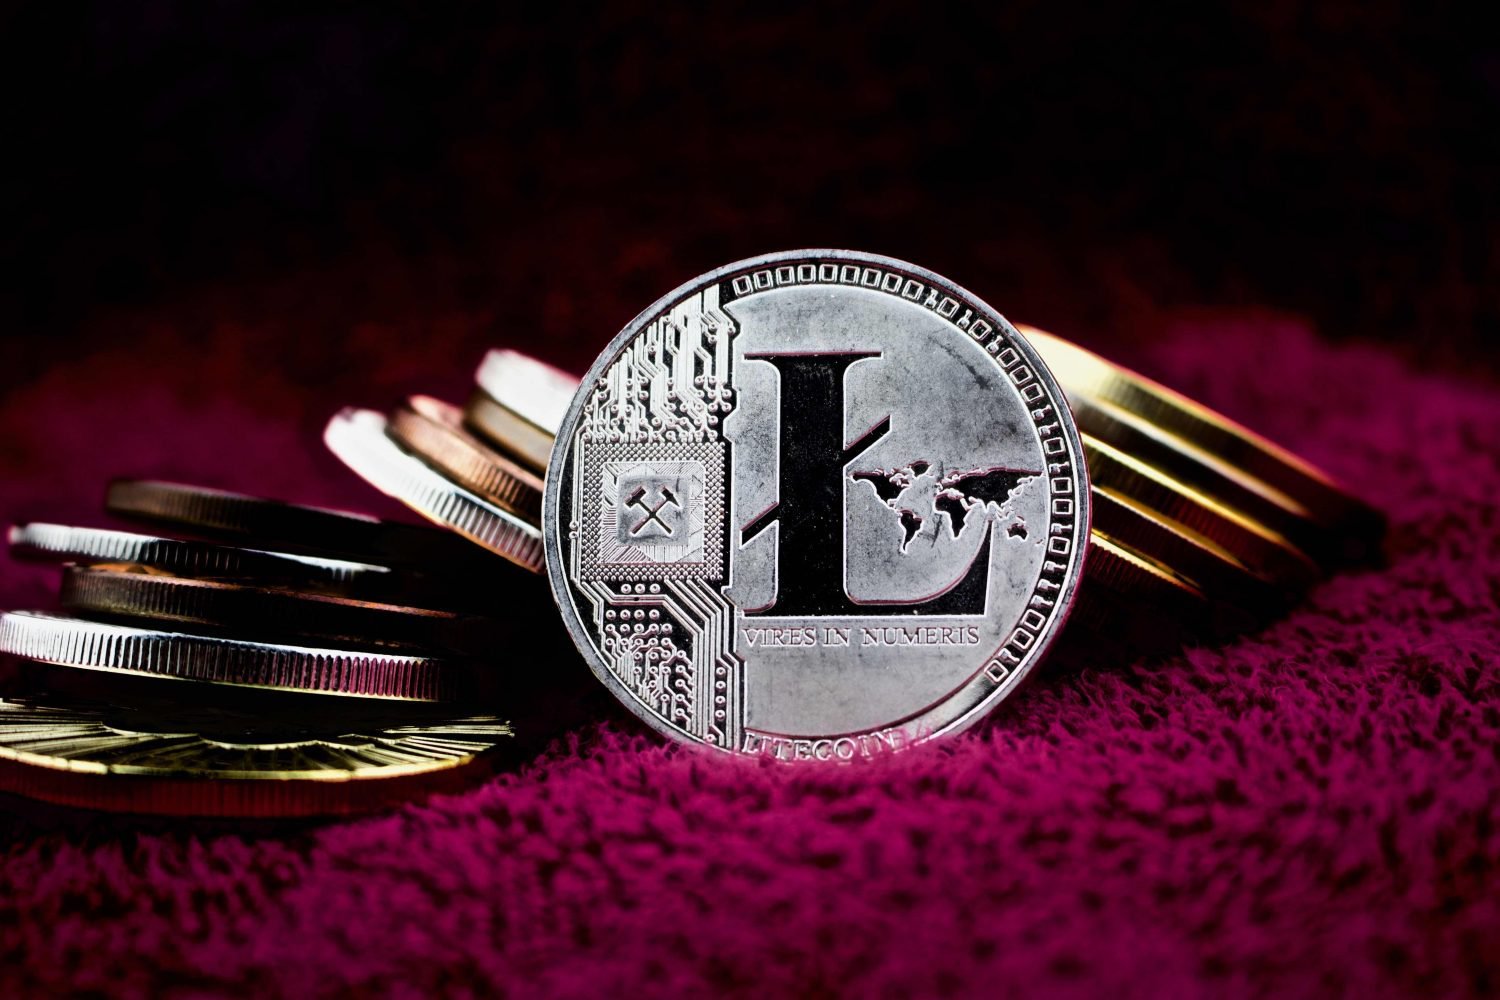 MORE THAN ONE THOUSAND STORES WILL BE ABLE TO ACCEPT PAYMENT IN LITECOIN VIA LIGHTNING